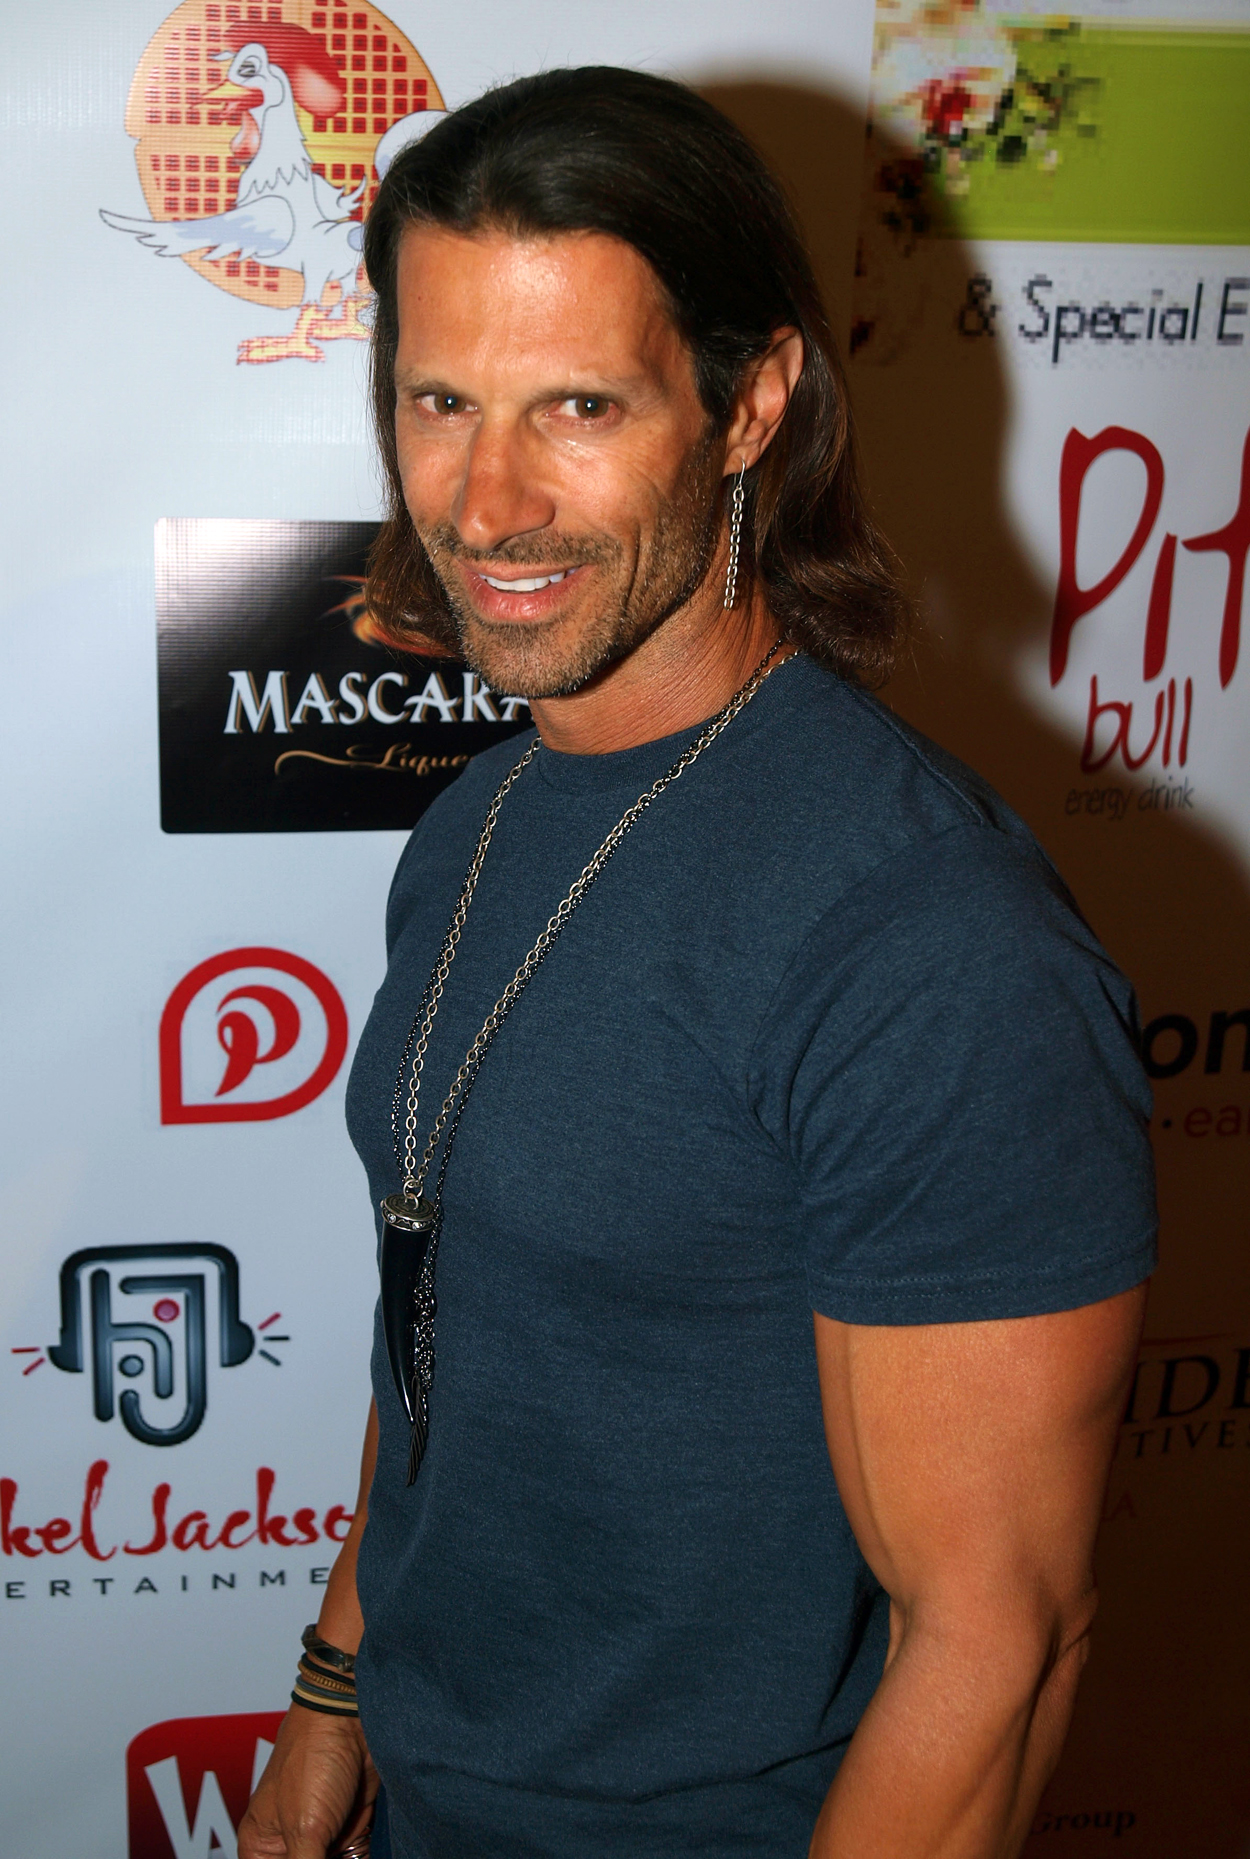 Rich Tola at the Black Pearl Media Red Carpet Event - September 27, 2013